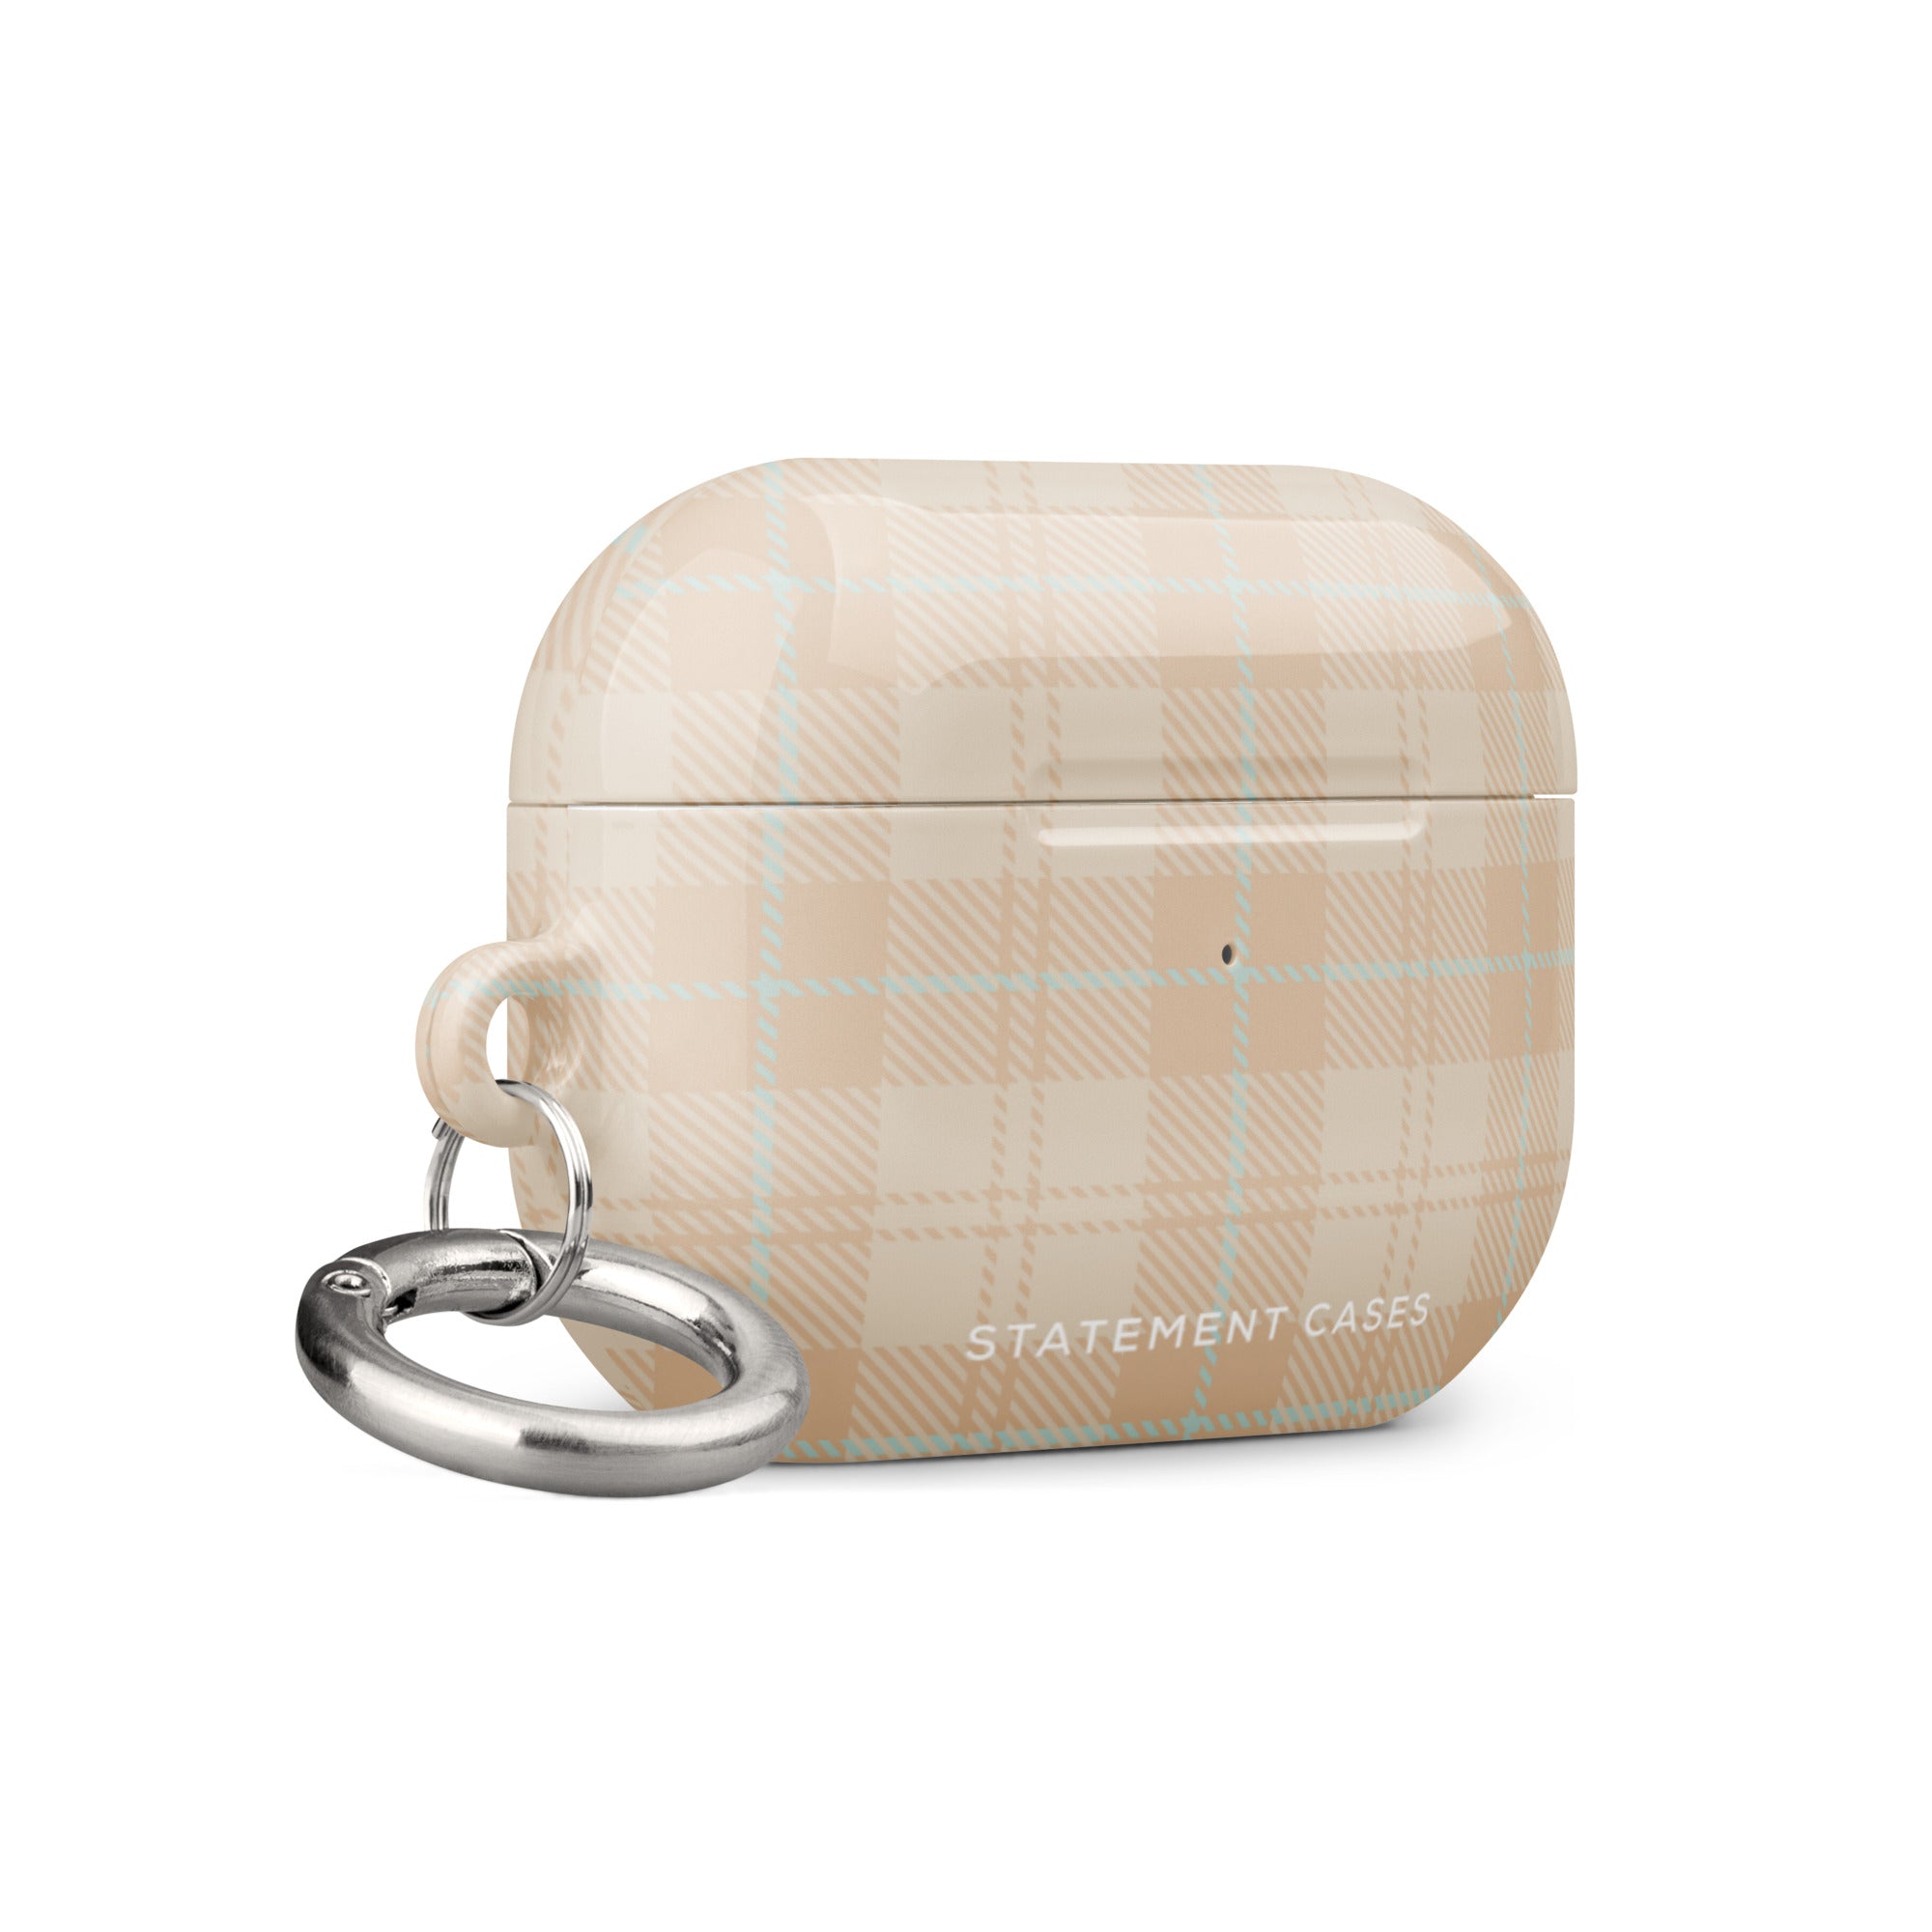 A beige plaid Sophisticated Plaid for AirPods Pro Gen 2 with a small yet robust metal carabiner attached to the side. The impact-absorbing case features the brand name "Statement Cases" in white text on the front.